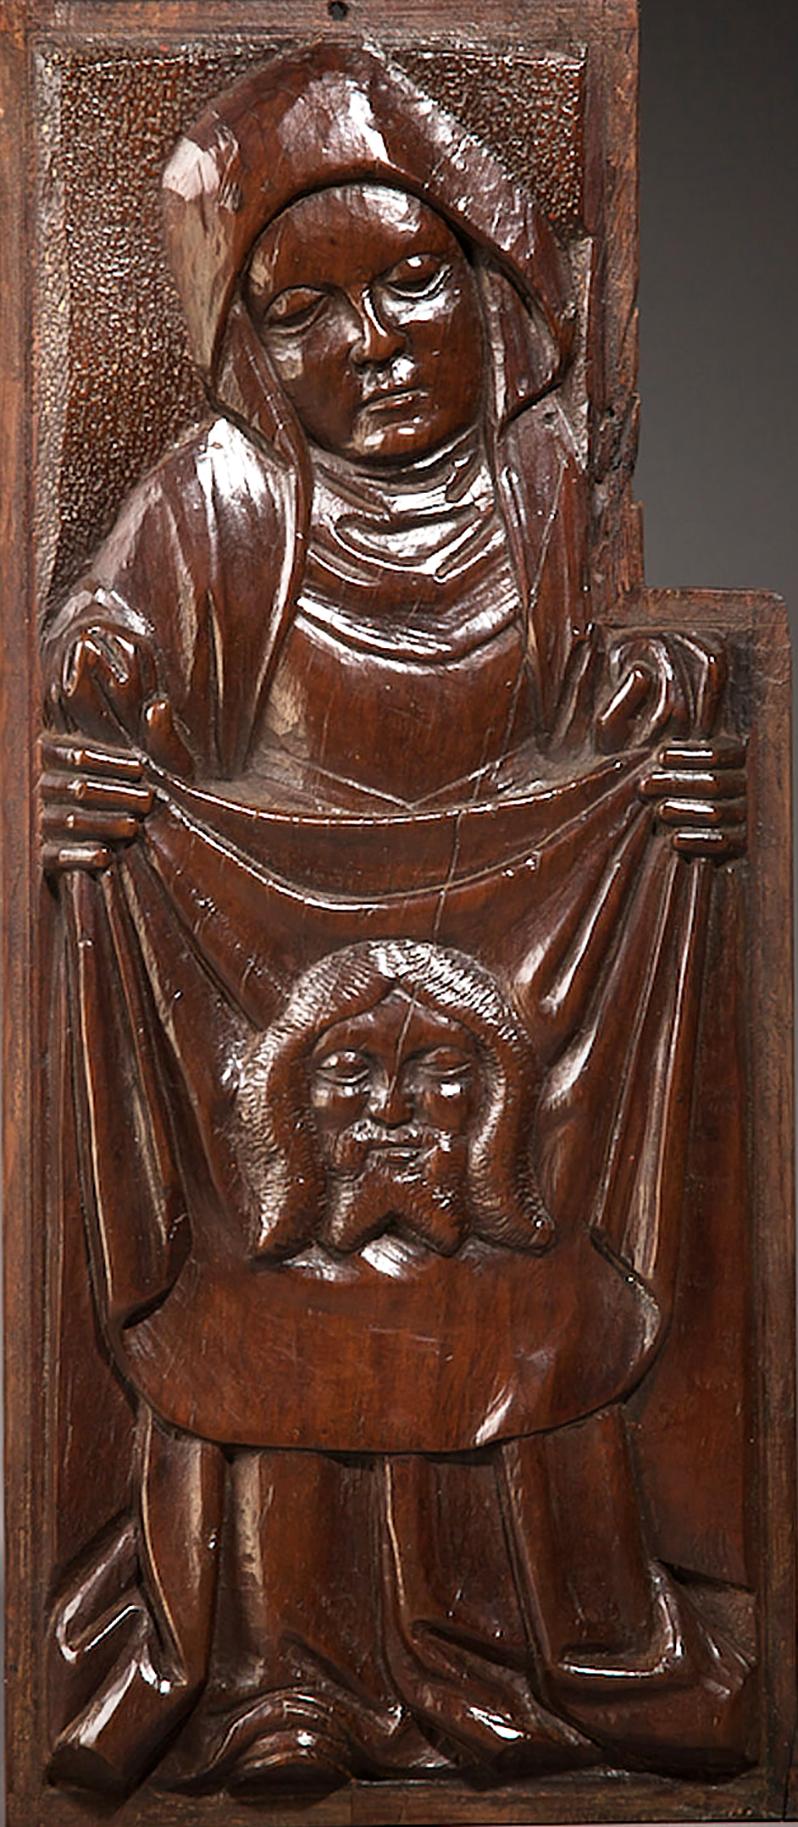 Rare set of four English Tudor Pre Reformation Yew panels, circa 1500-1540.

The four panels carved in high relief depicting St Veronica with the face of Christ, The Annunciation with Lion of Judah, The Virgin and Child and St John with mitre and